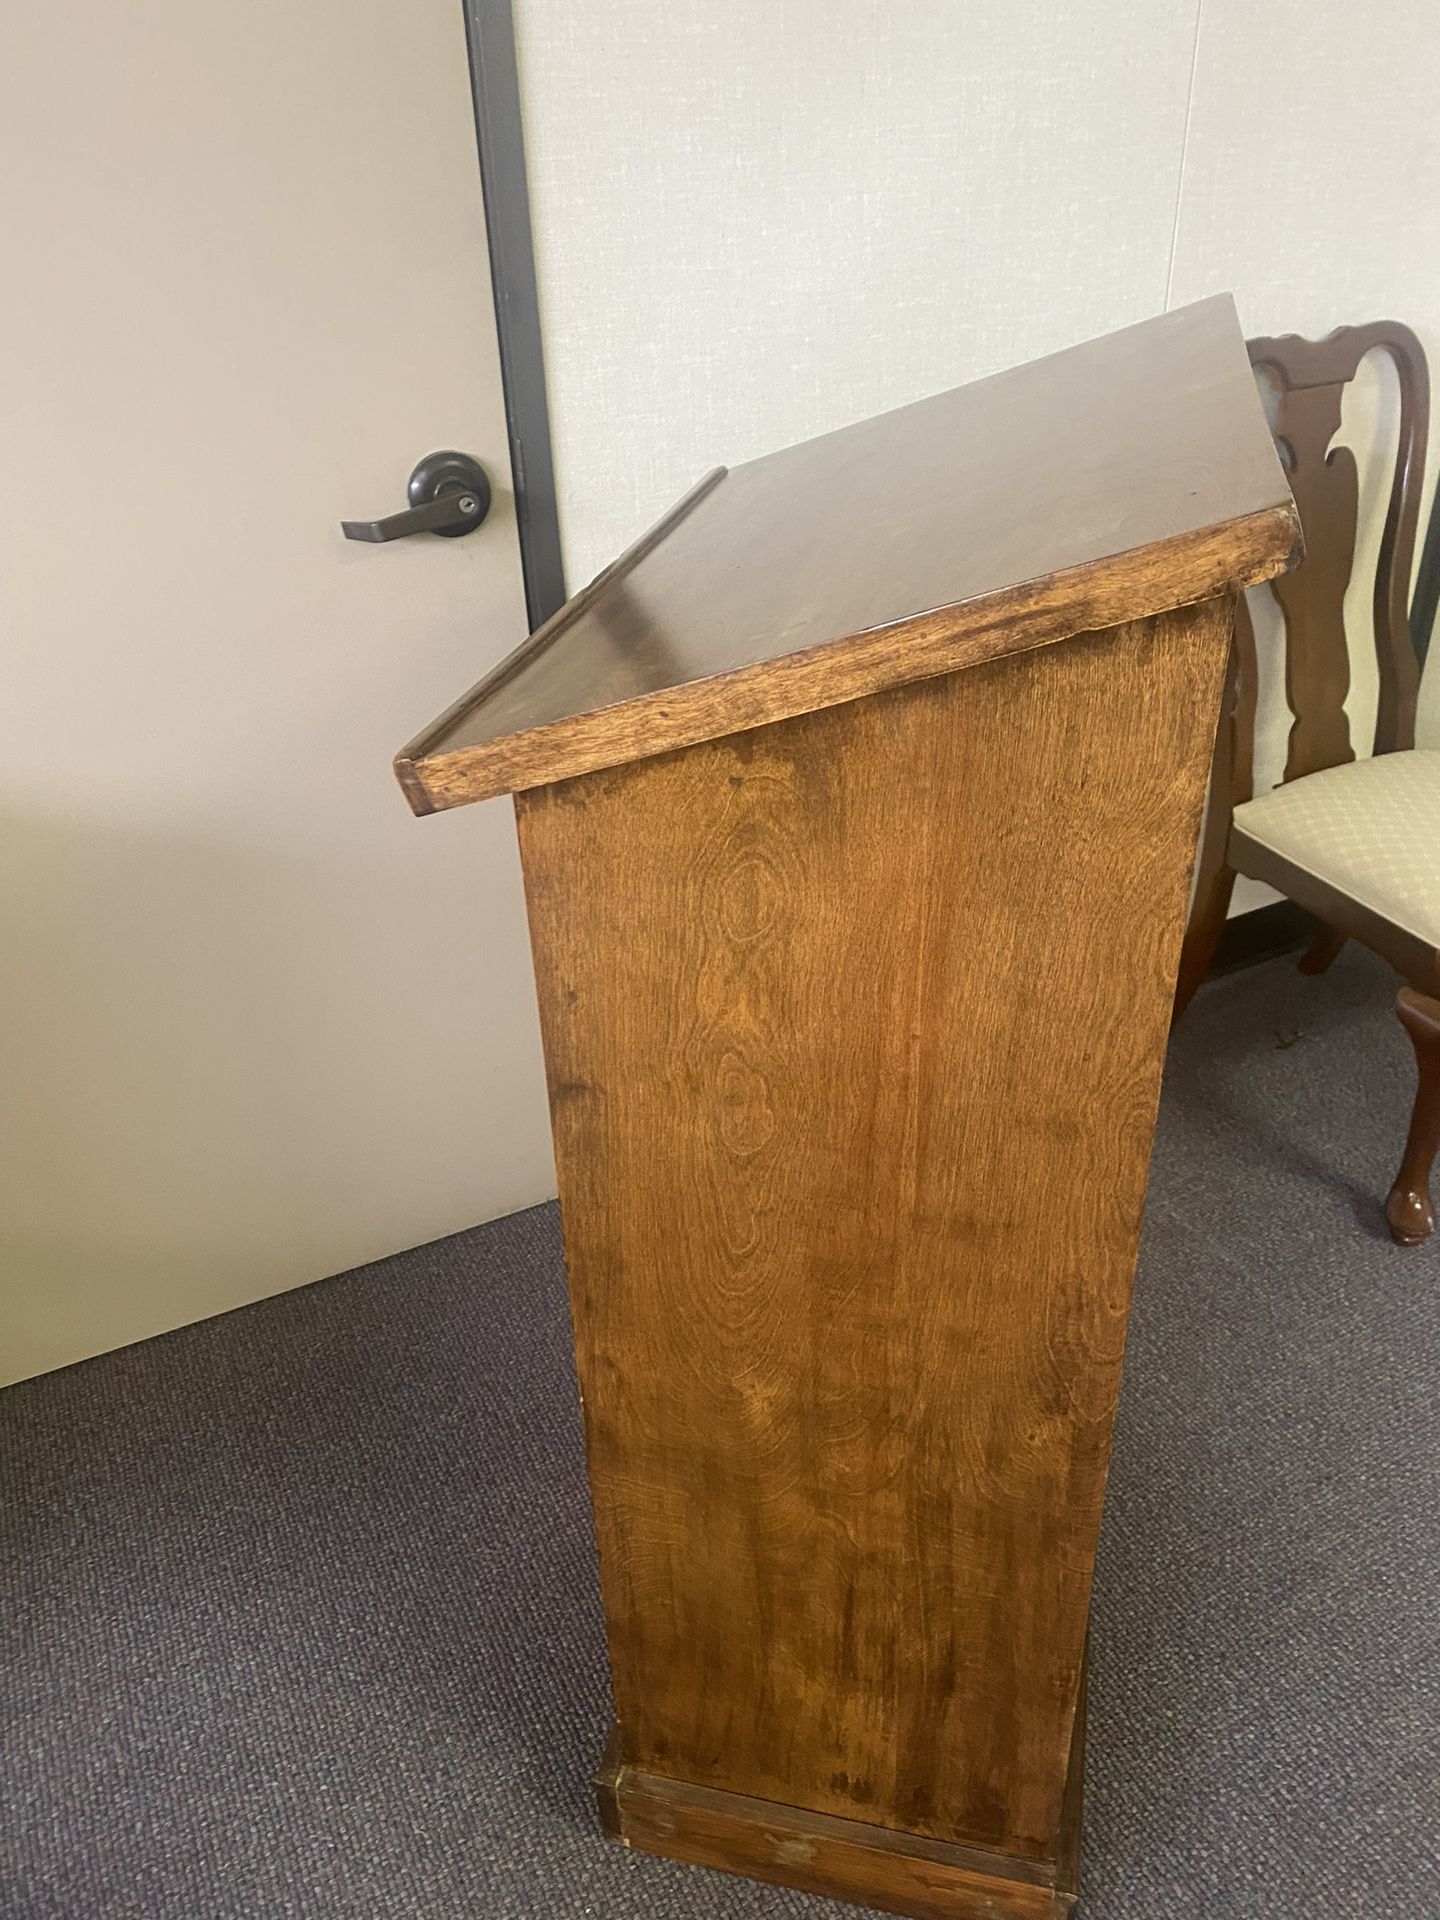 Wooden Podiums $25 Each